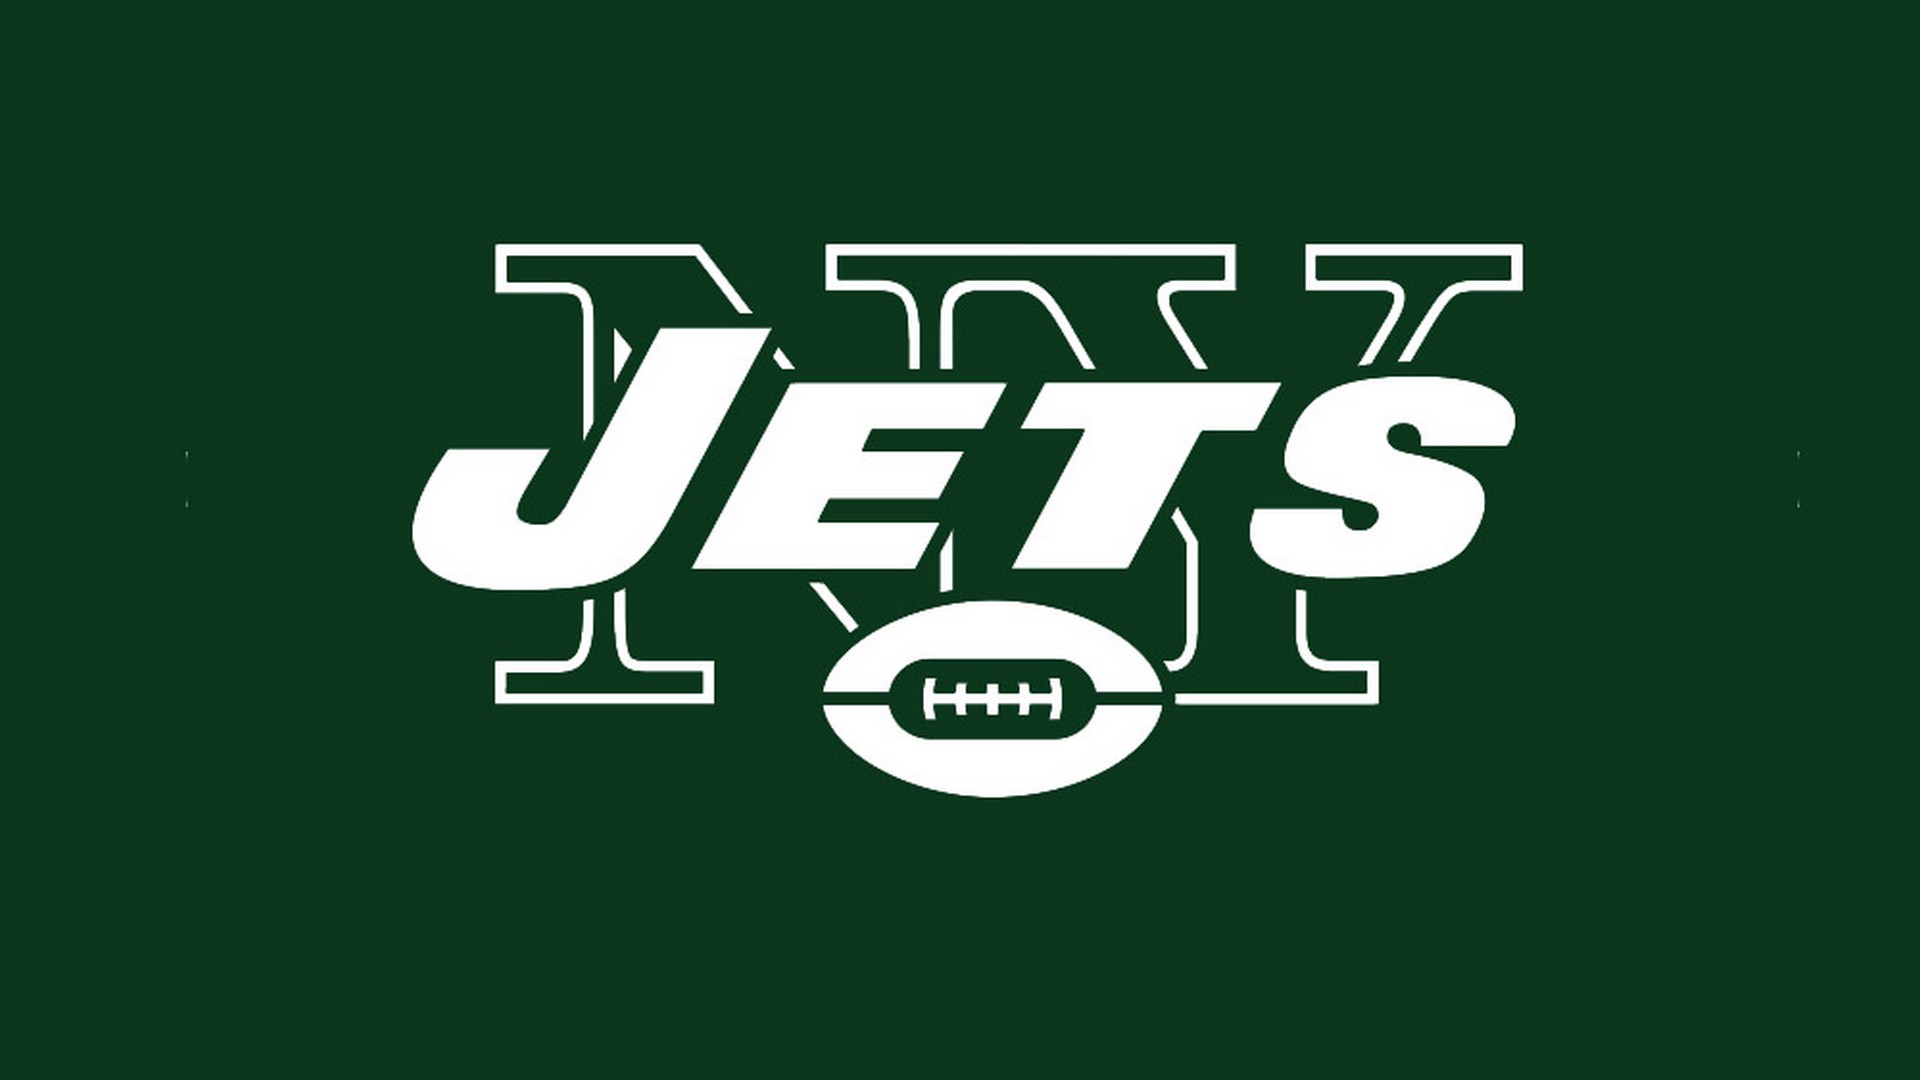 HD Desktop Wallpaper New York Jets With Resolution 1920X1080 pixel. You can make this wallpaper for your Mac or Windows Desktop Background, iPhone, Android or Tablet and another Smartphone device for free